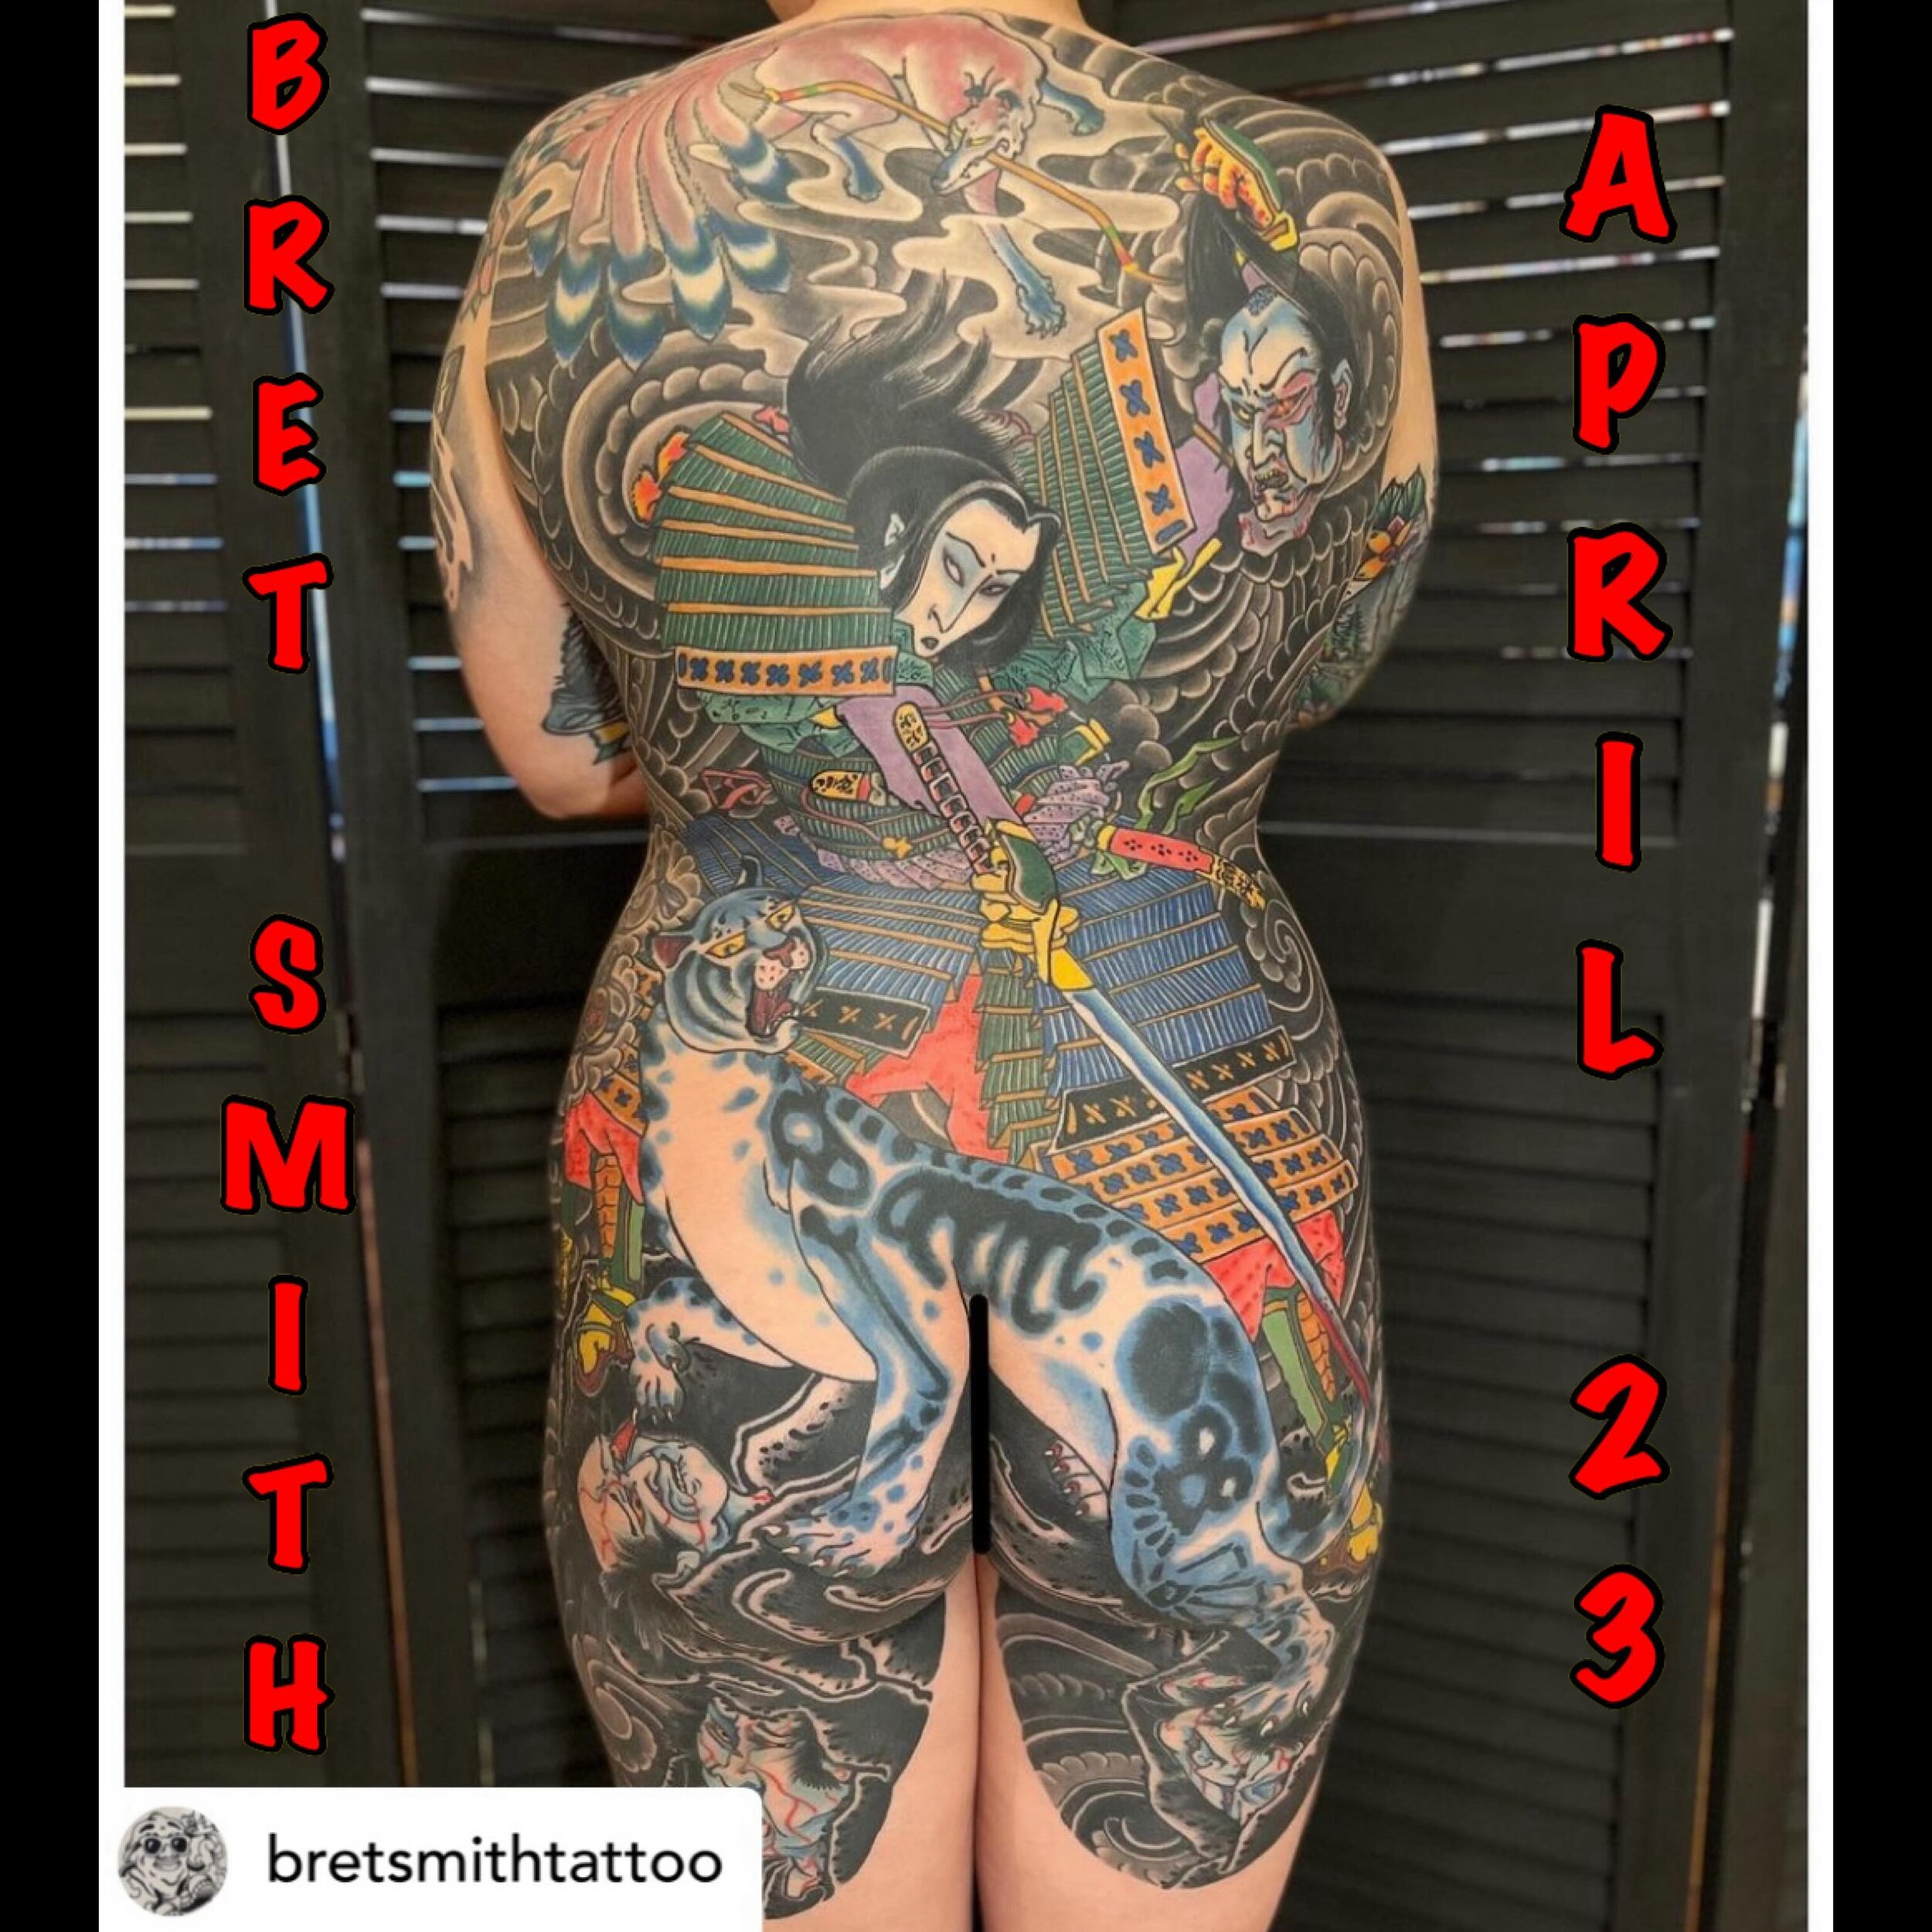 Our homeboy @bretsmithtattoo will be back in the shop for ONE DAY ONLY! You better get in! Don&rsquo;t be sorry, get a rad tattoo. TUESDAY APRIL 23 guaranteed fun day